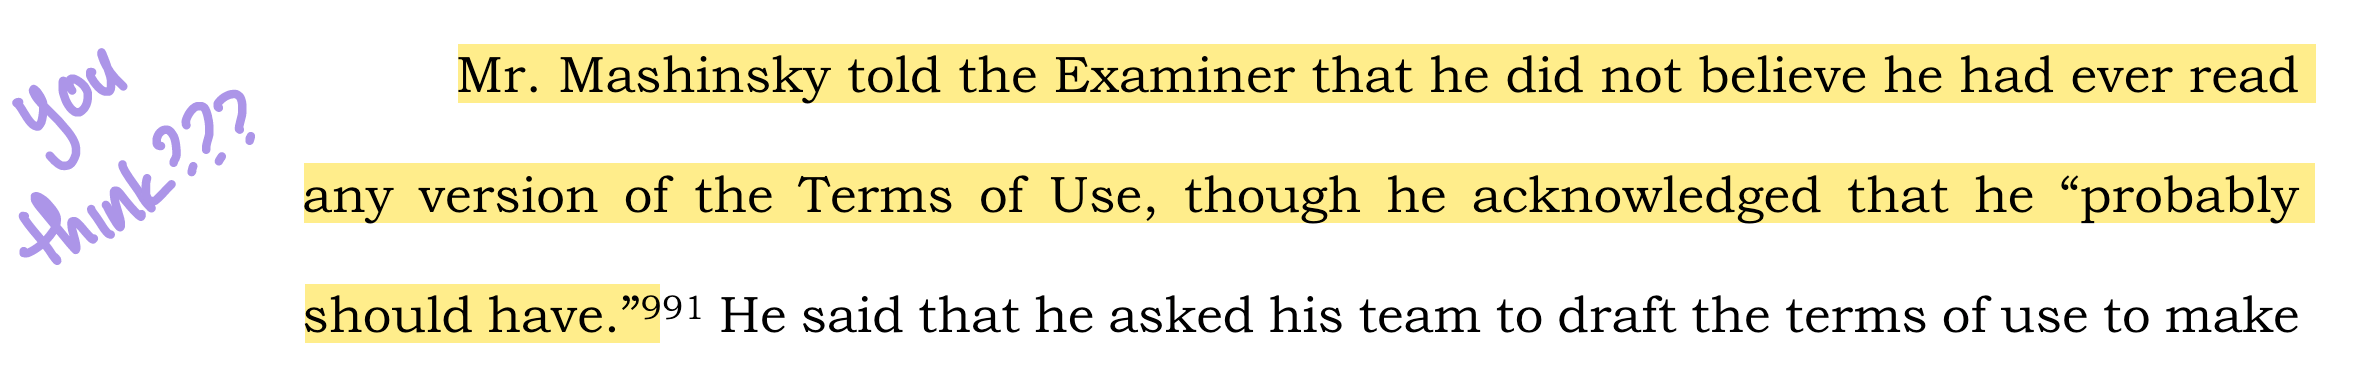 Highlighted text: "Mr. Mashinsky told the Examiner that he did not believe he had ever read any version of the Terms of Use, though he acknowledged that he “probably should have.”" Handwritten in the margin in purple: "you think???"